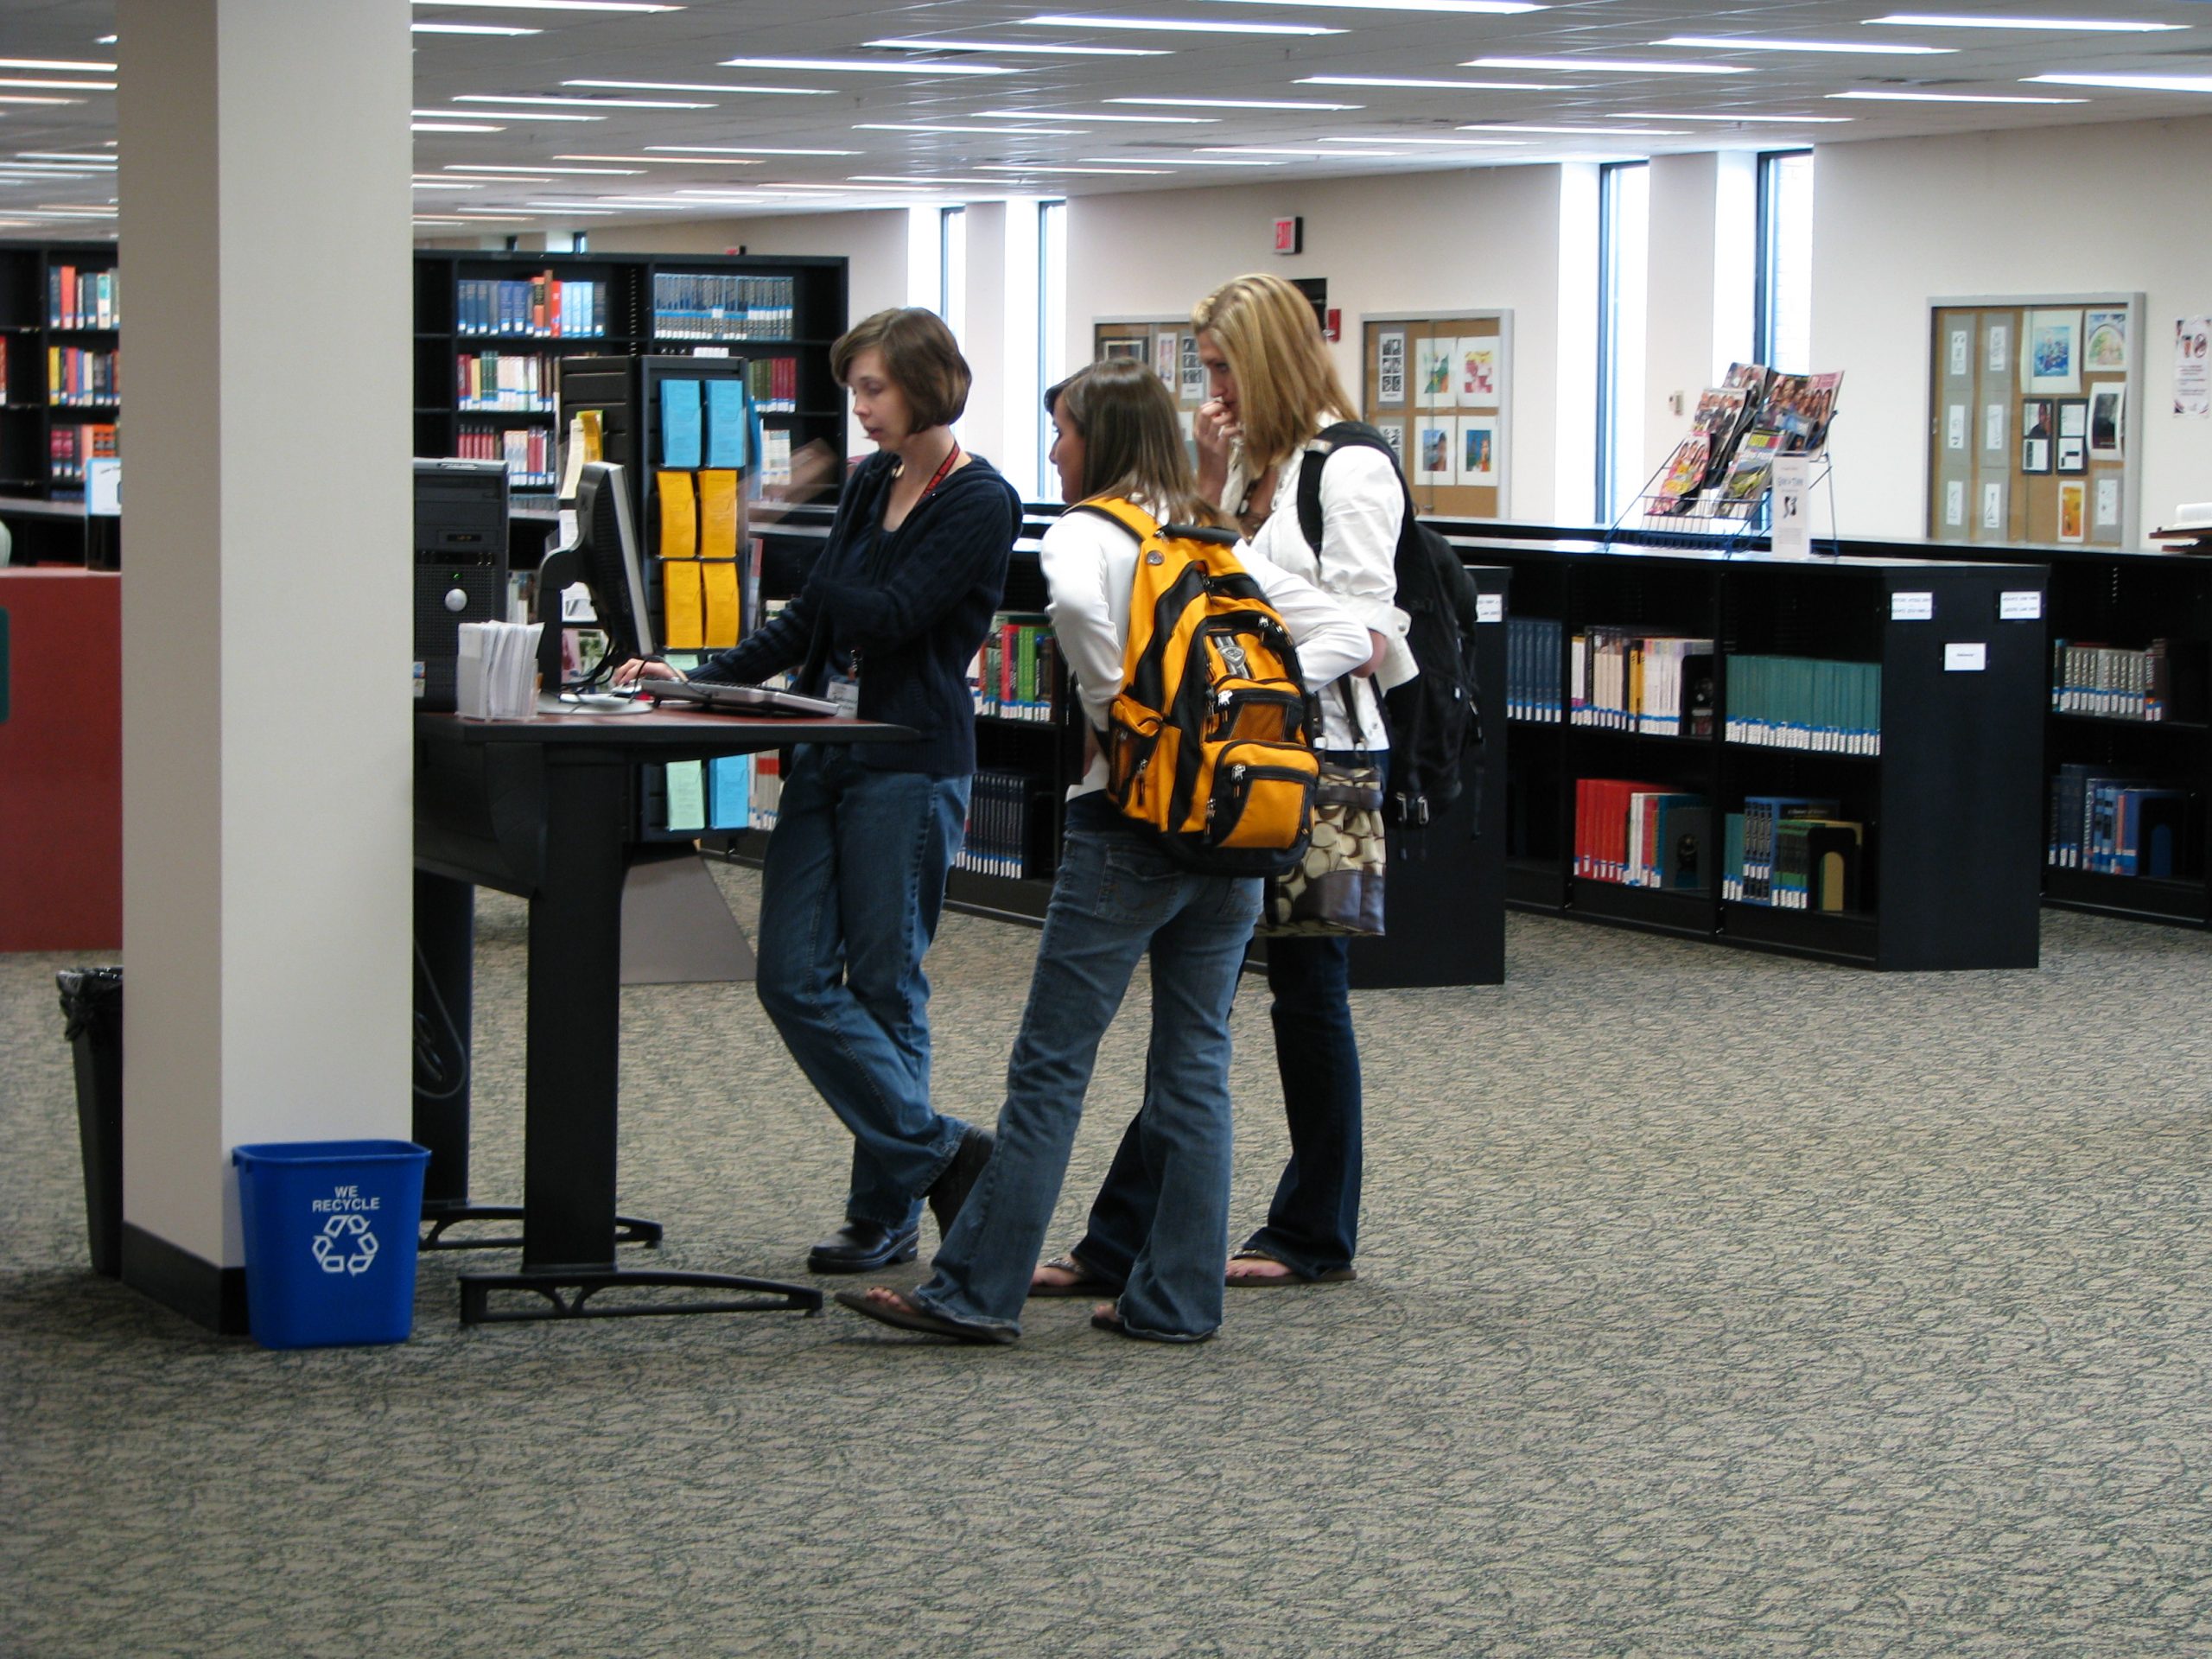 Lauren Wahman helping two students at stand-up computer station